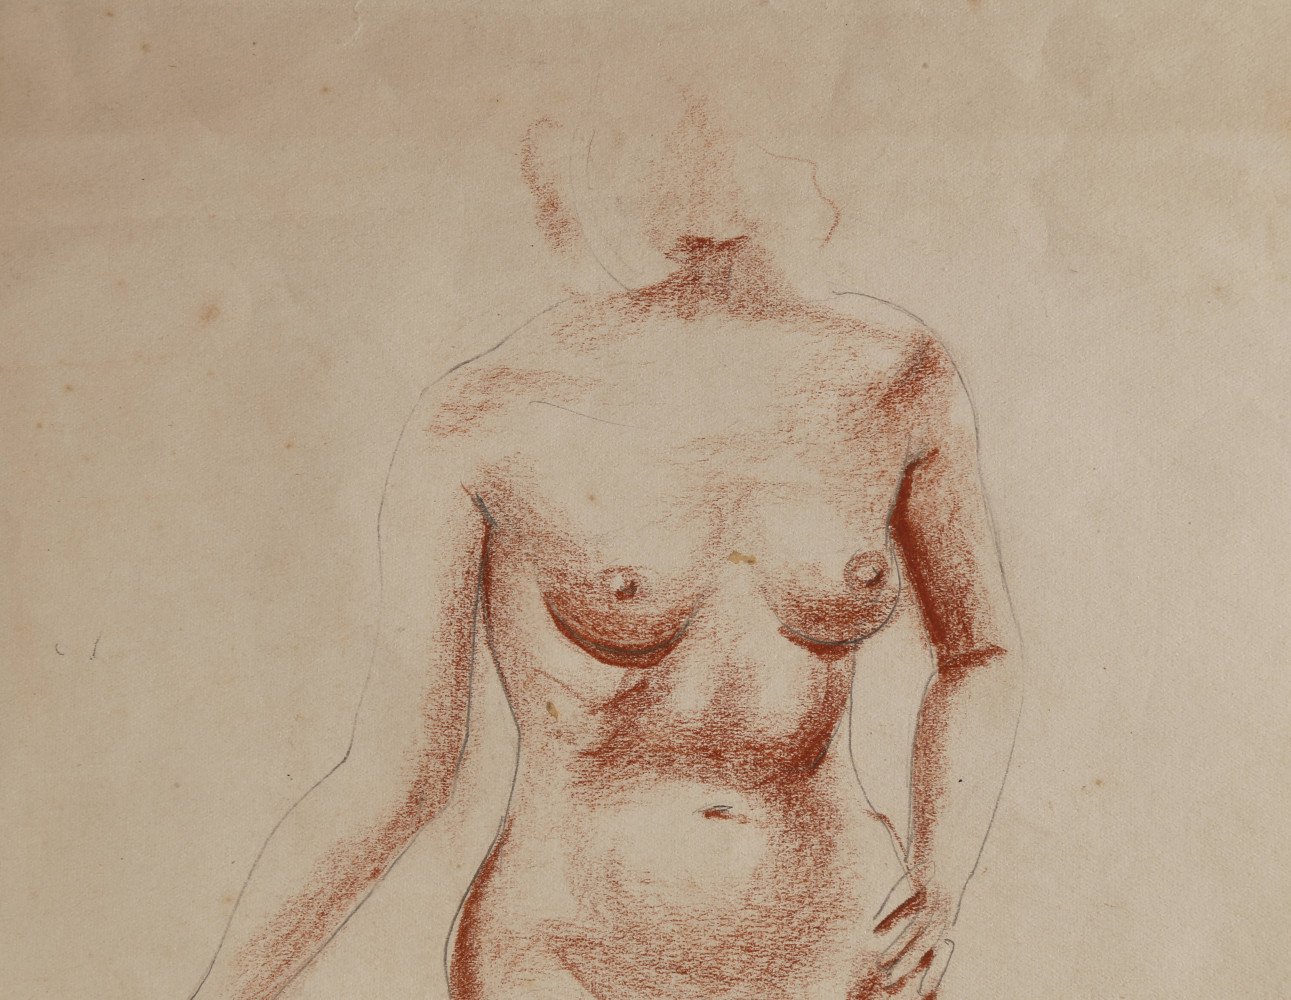 Figurative Conté Crayon and Graphite on Paper Drawing: 